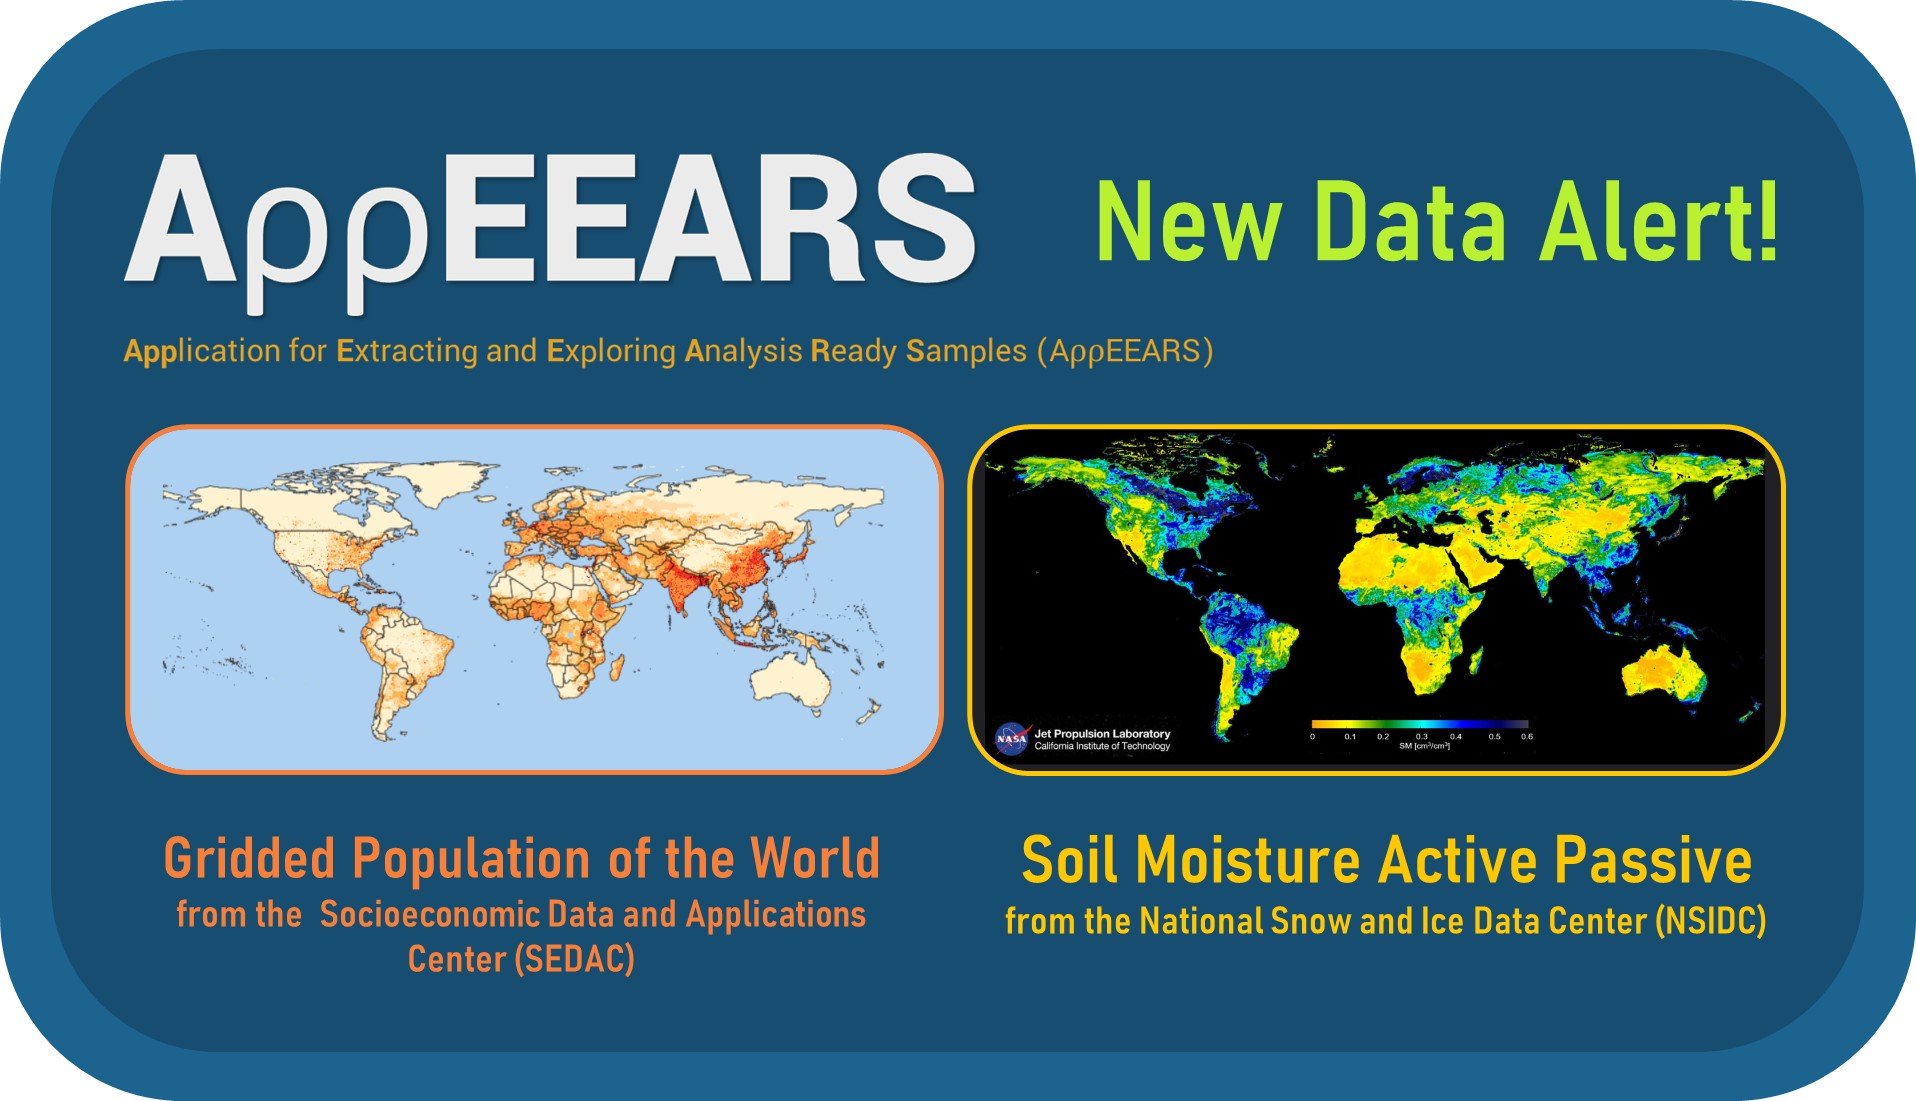 New Data Alert Announcement. Image shows two maps with global coverage of Gridded Population of the World and Soil Moisture Active Passive datasets and details that the data are now available in AppEEARS.